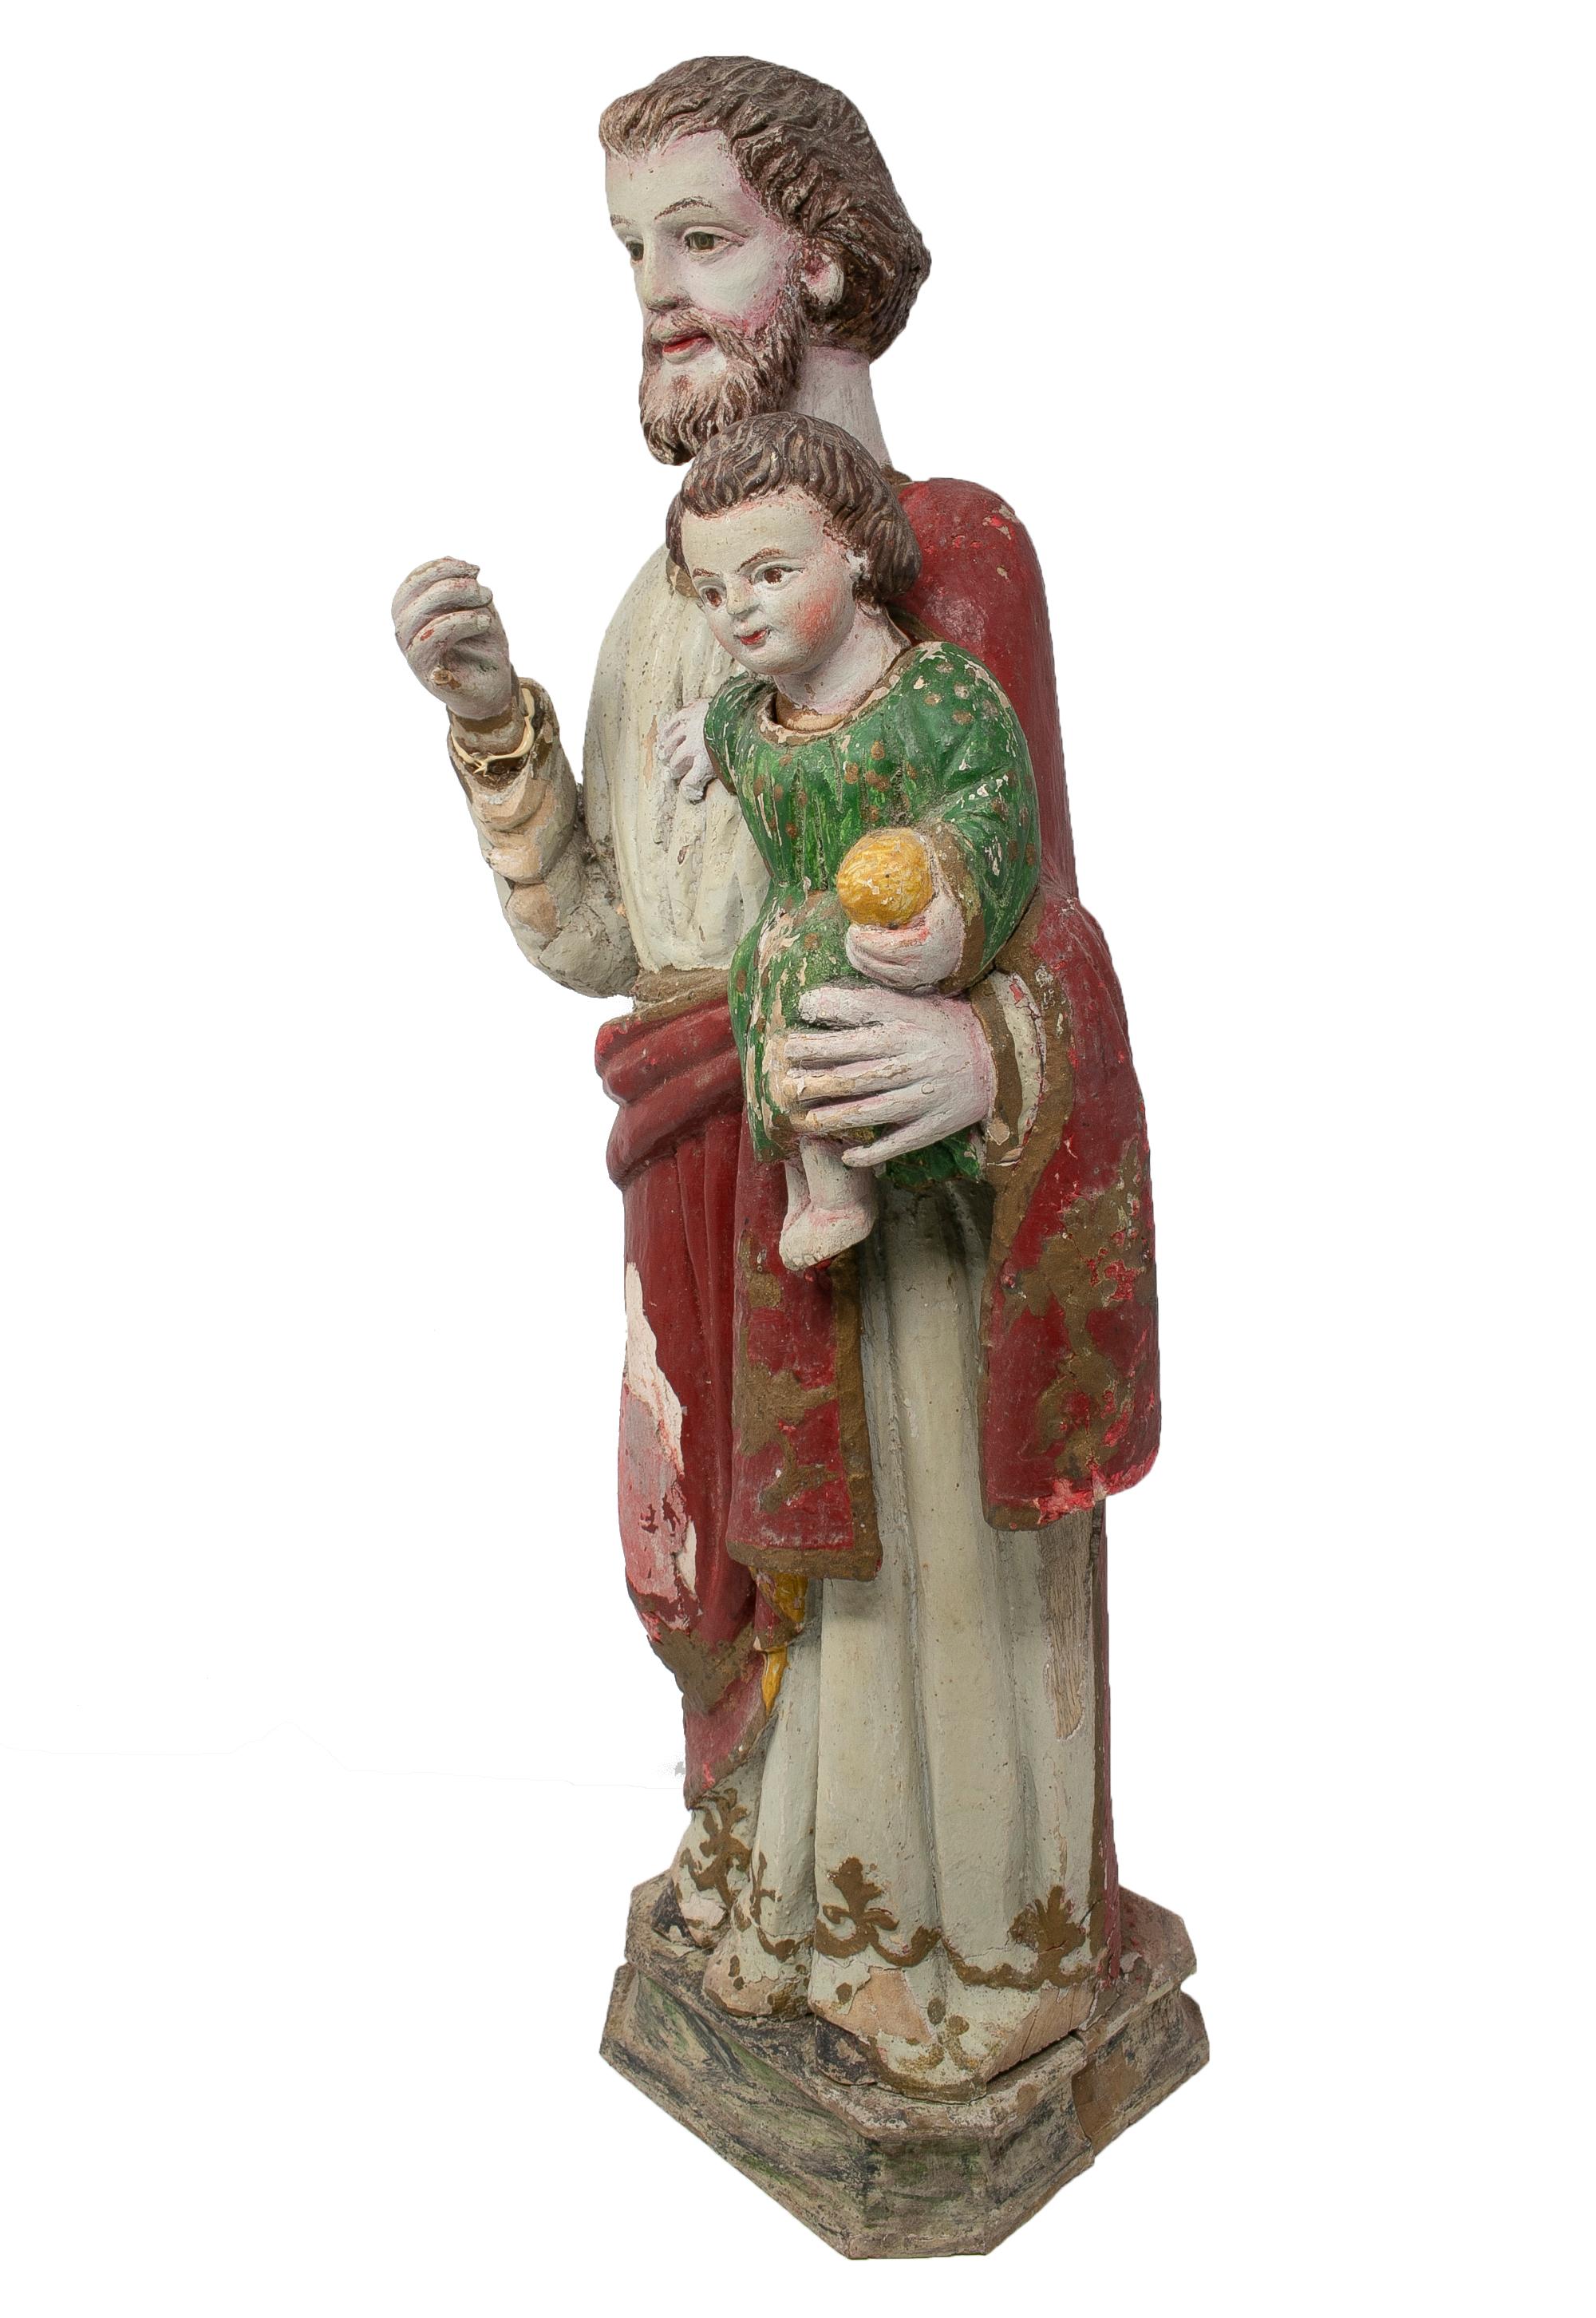 Mid-19th century Spanish painted polychrome figurative sculpture of a saint.